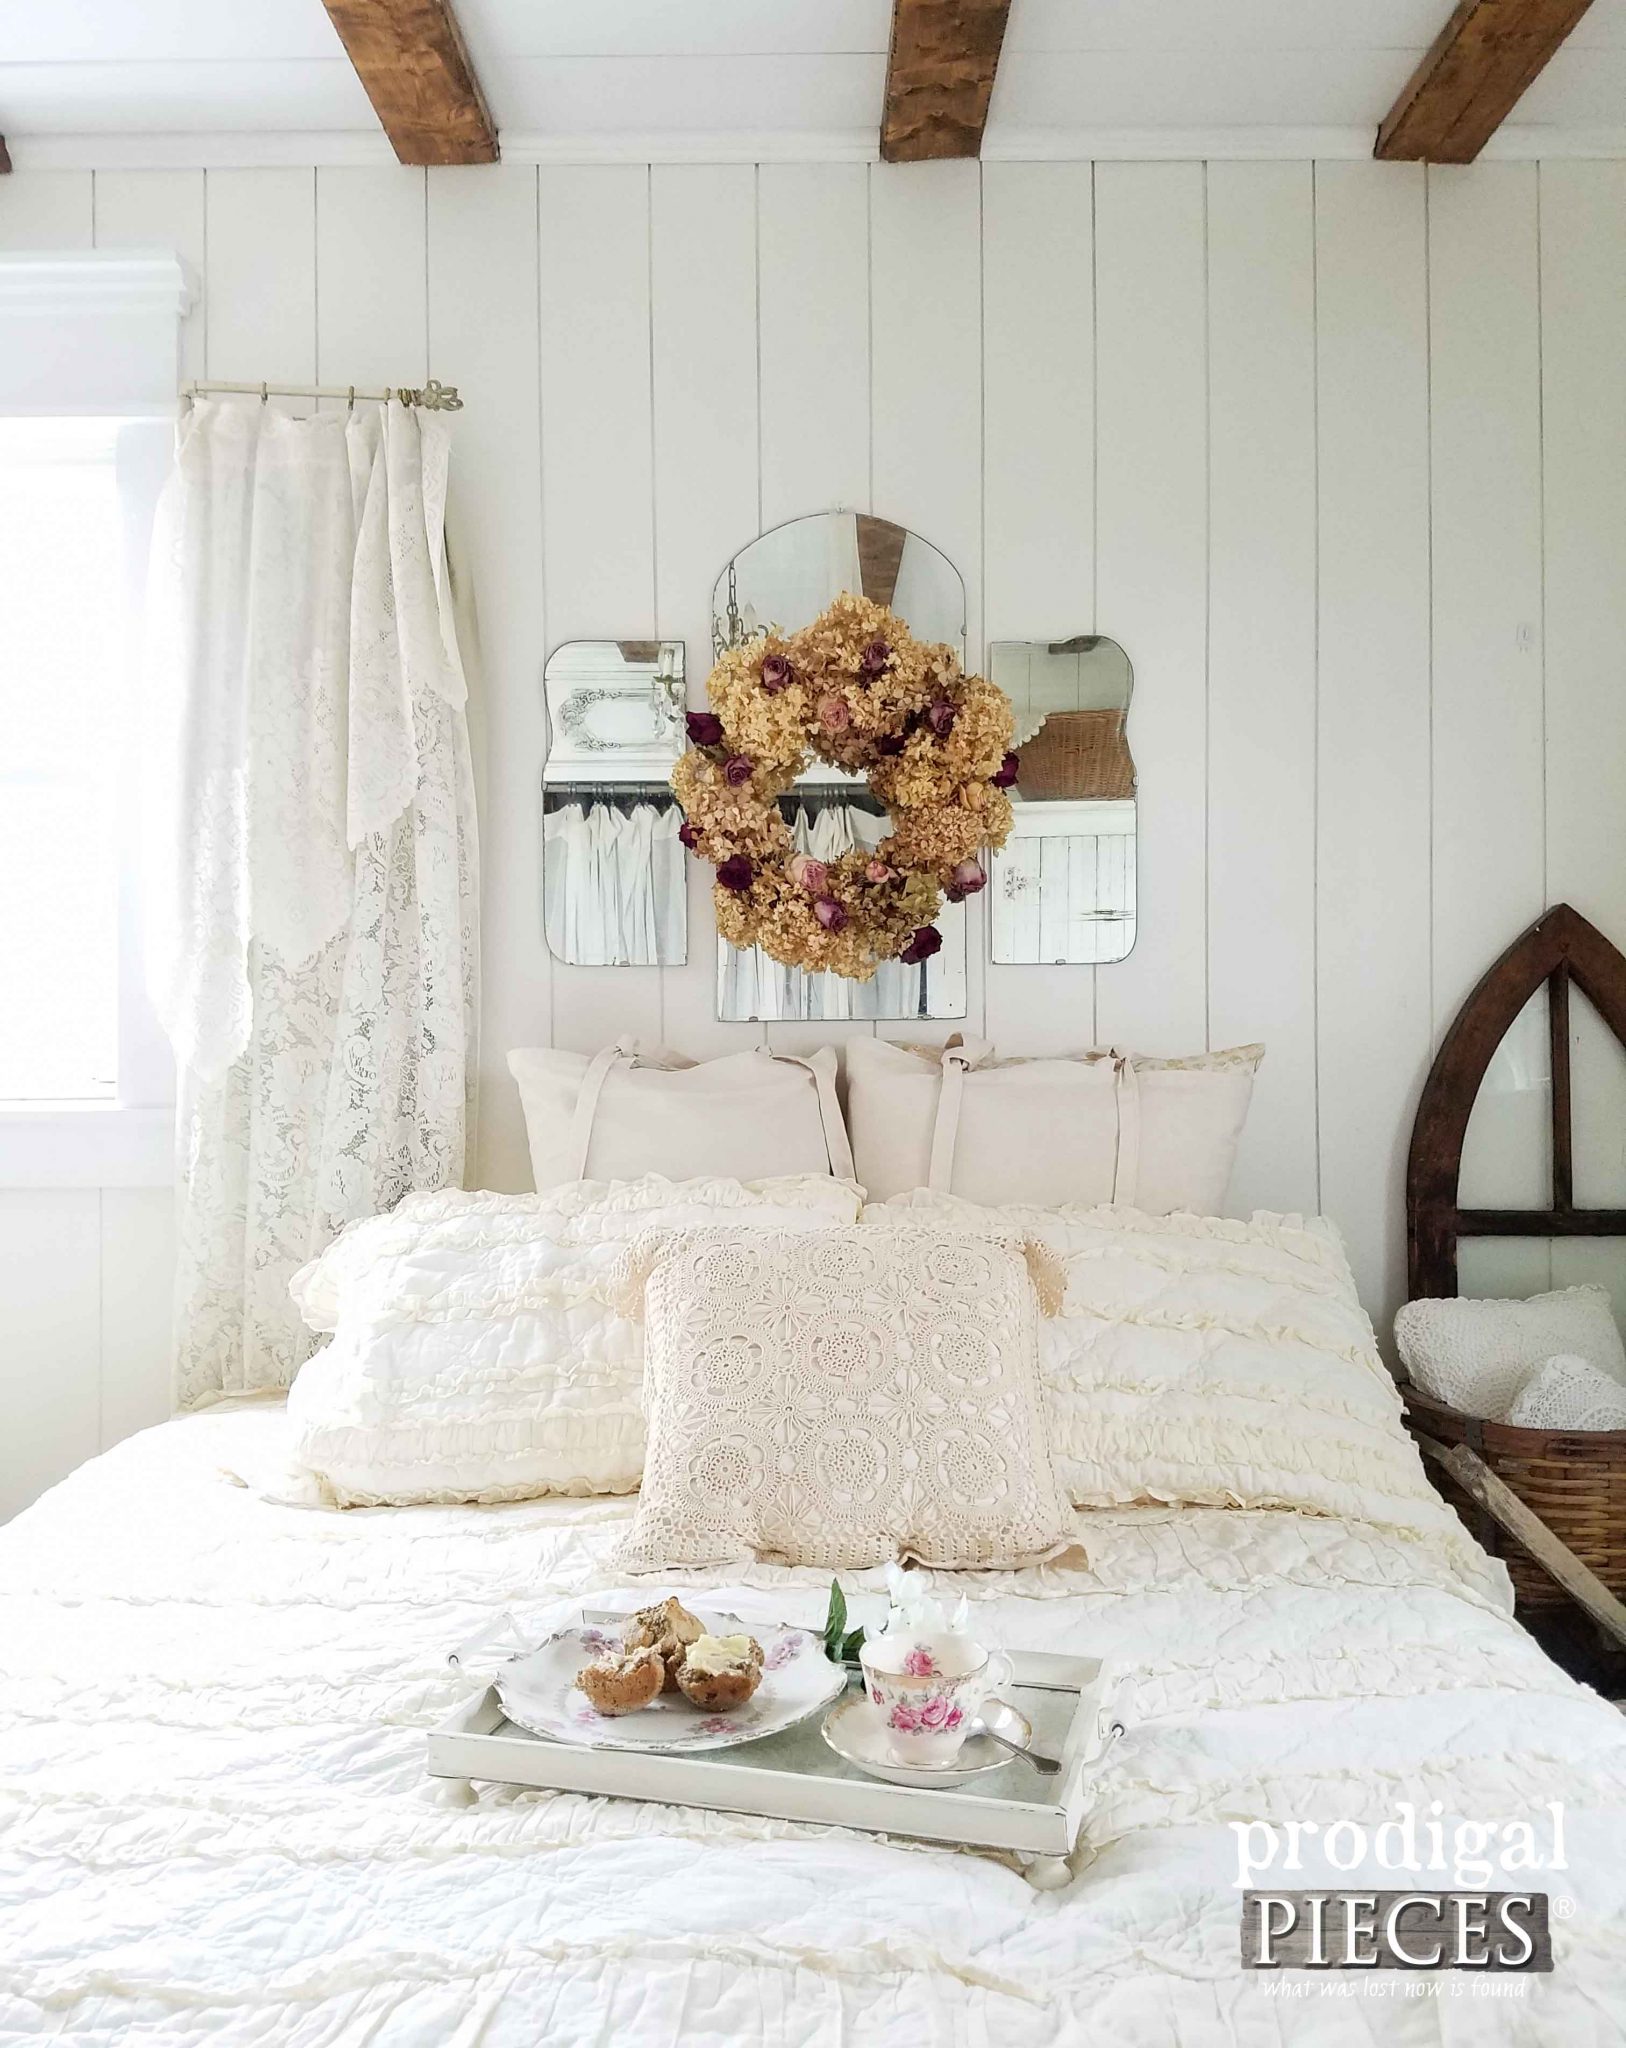 Farmhouse Bedroom with Repurposed Home Decor by Prodigal Pieces | prodigalpieces.com